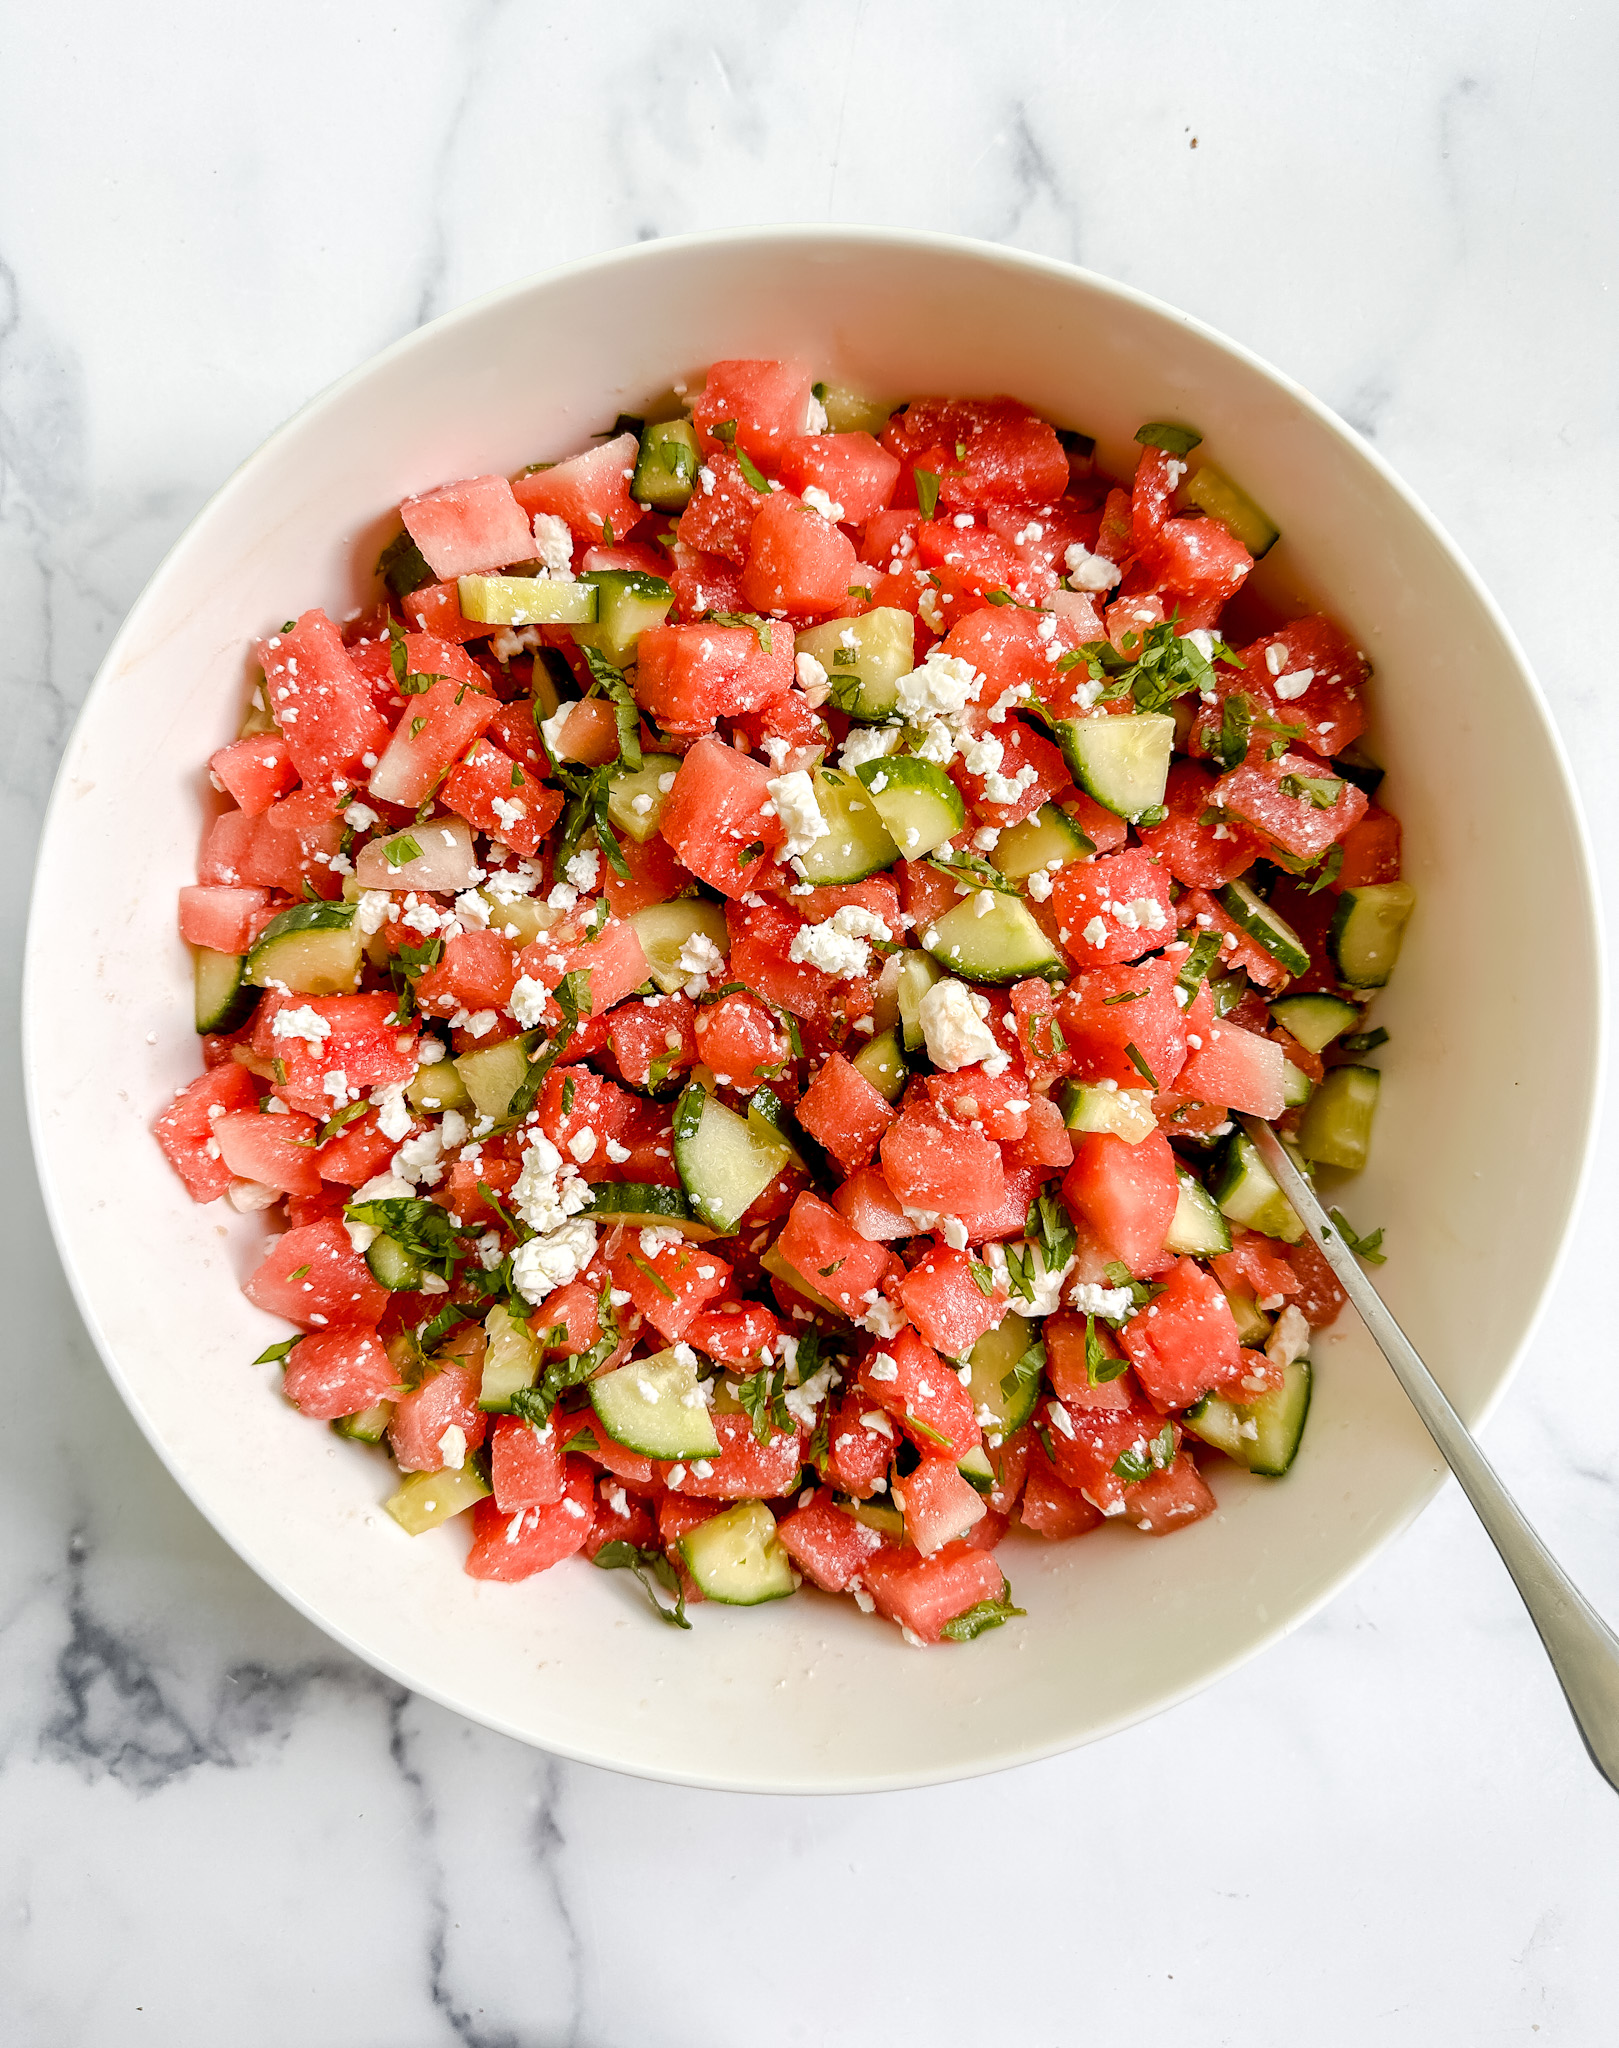 Watermelon Salad with Cucumber, Feta and Honey-Lime Dressing (Gluten Free, Vegetarian)